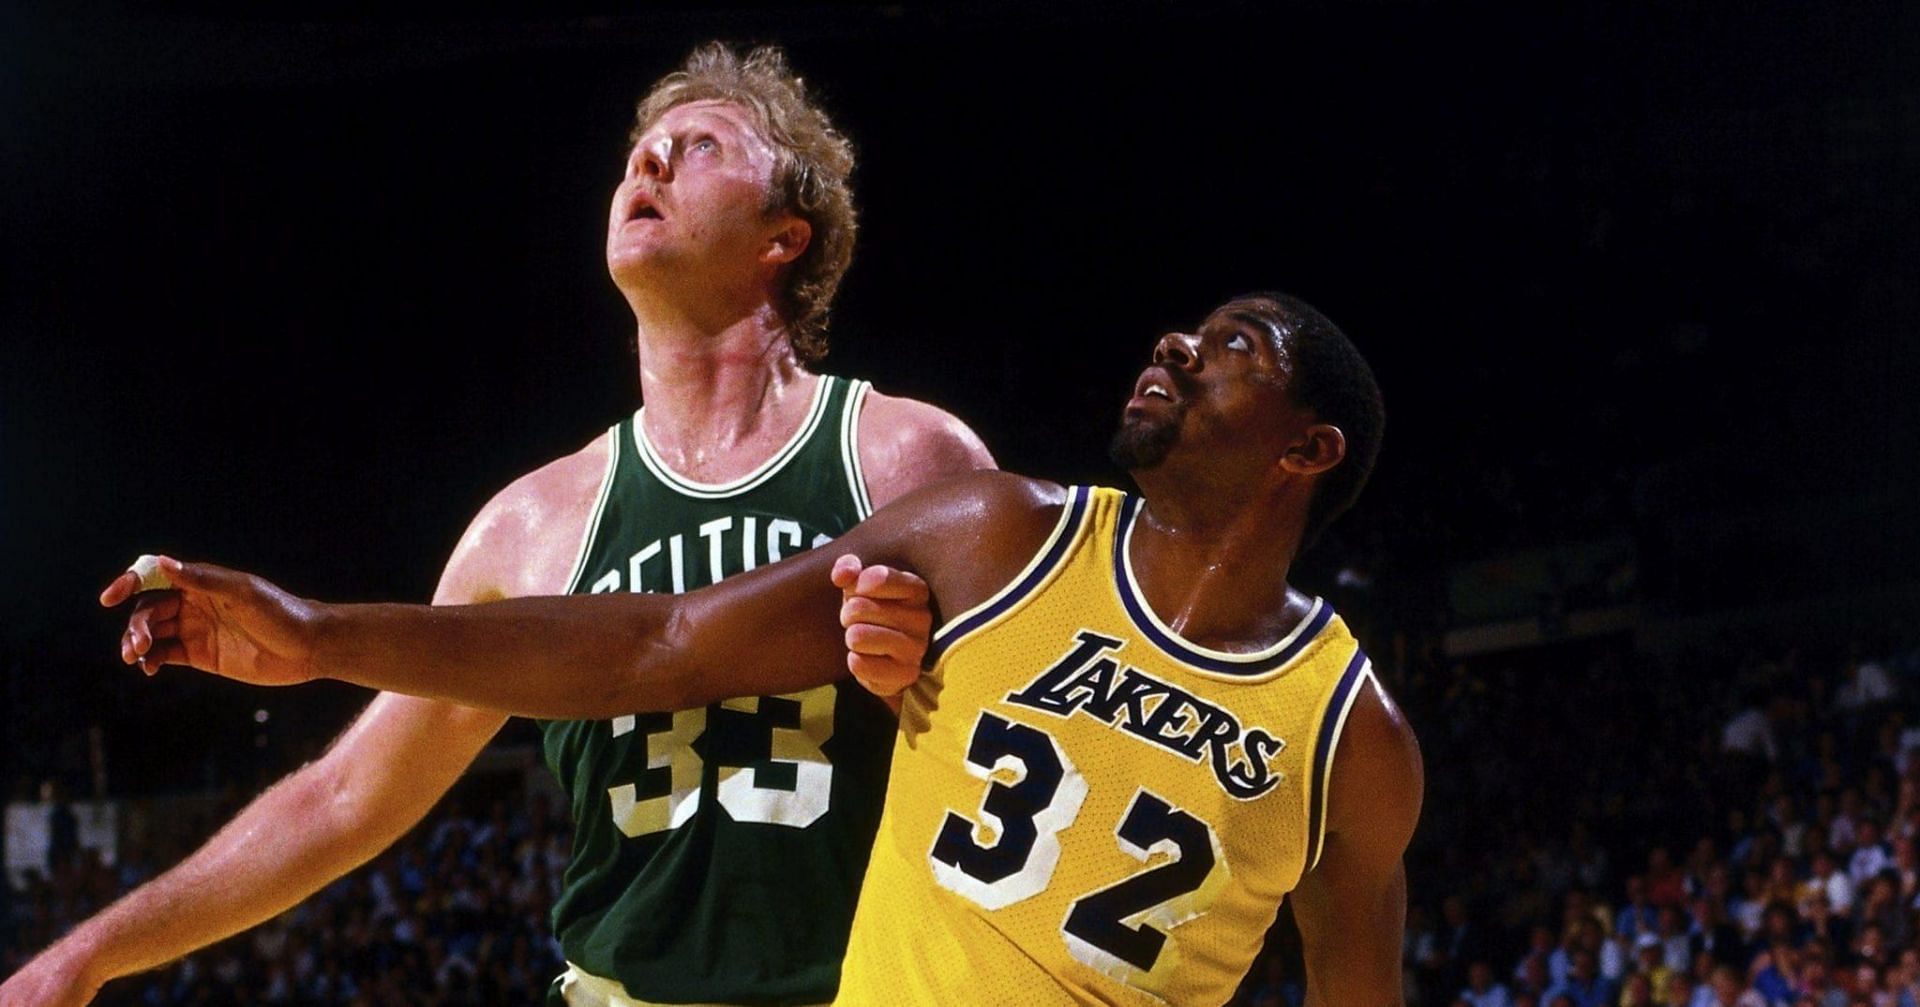 Magic Johnson was inconsolable after losing to Larry Bird in the 1984 NBA Finals. [Photo: Basketball Forever]